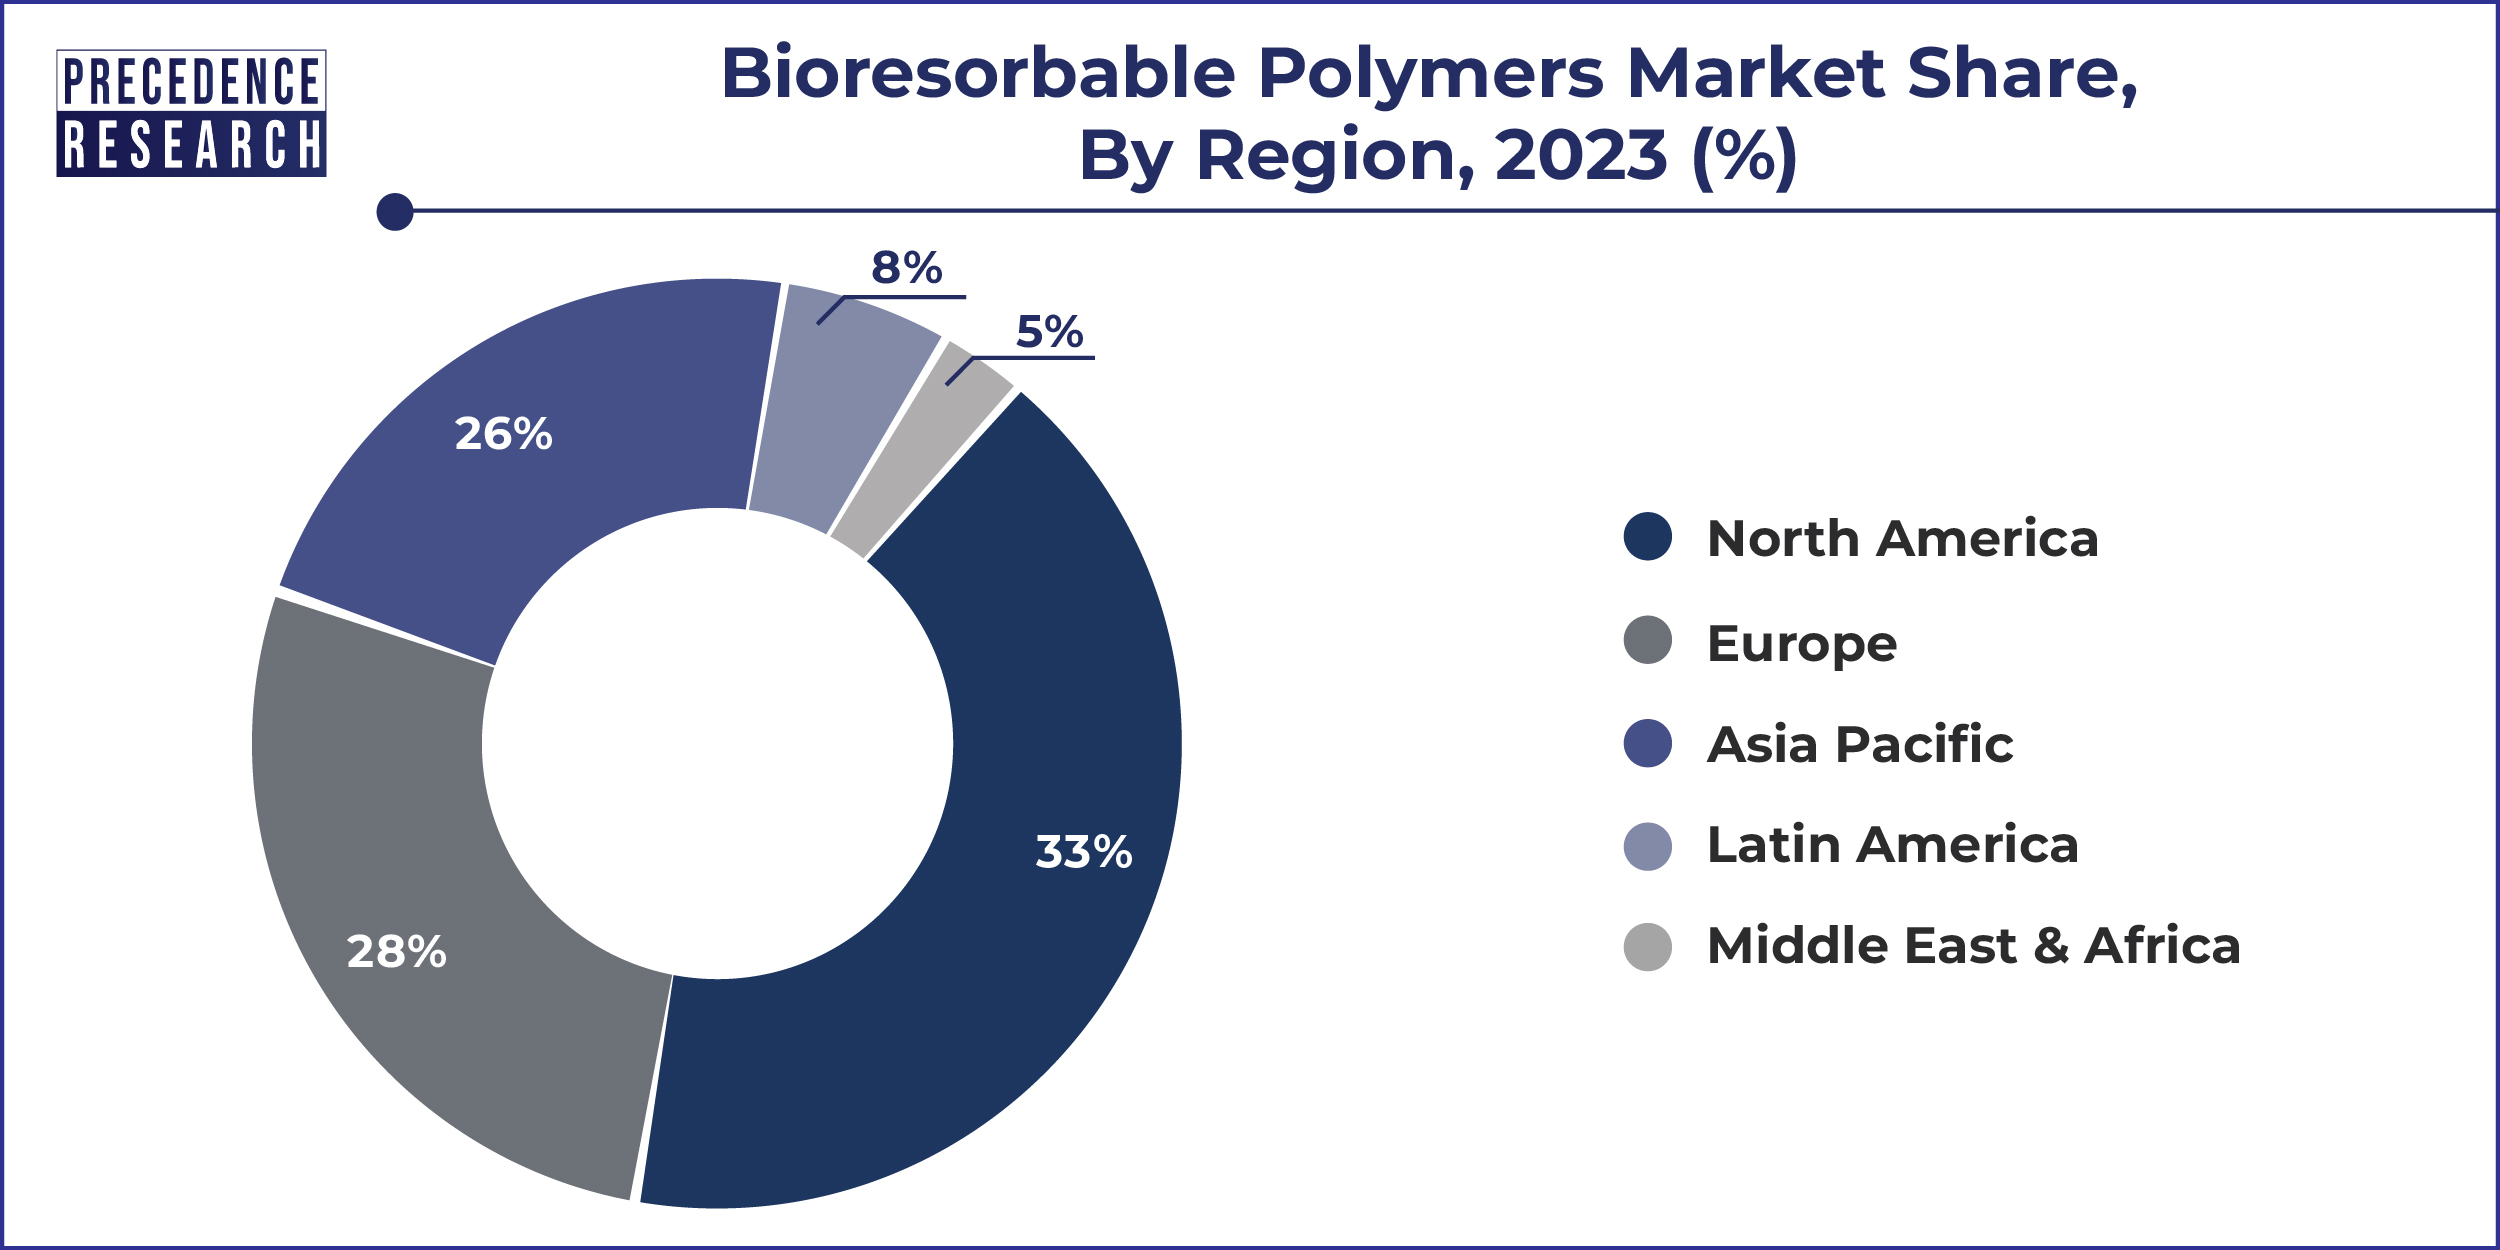 Bioresorbable Polymers Market Share, By Region, 2023 (%)